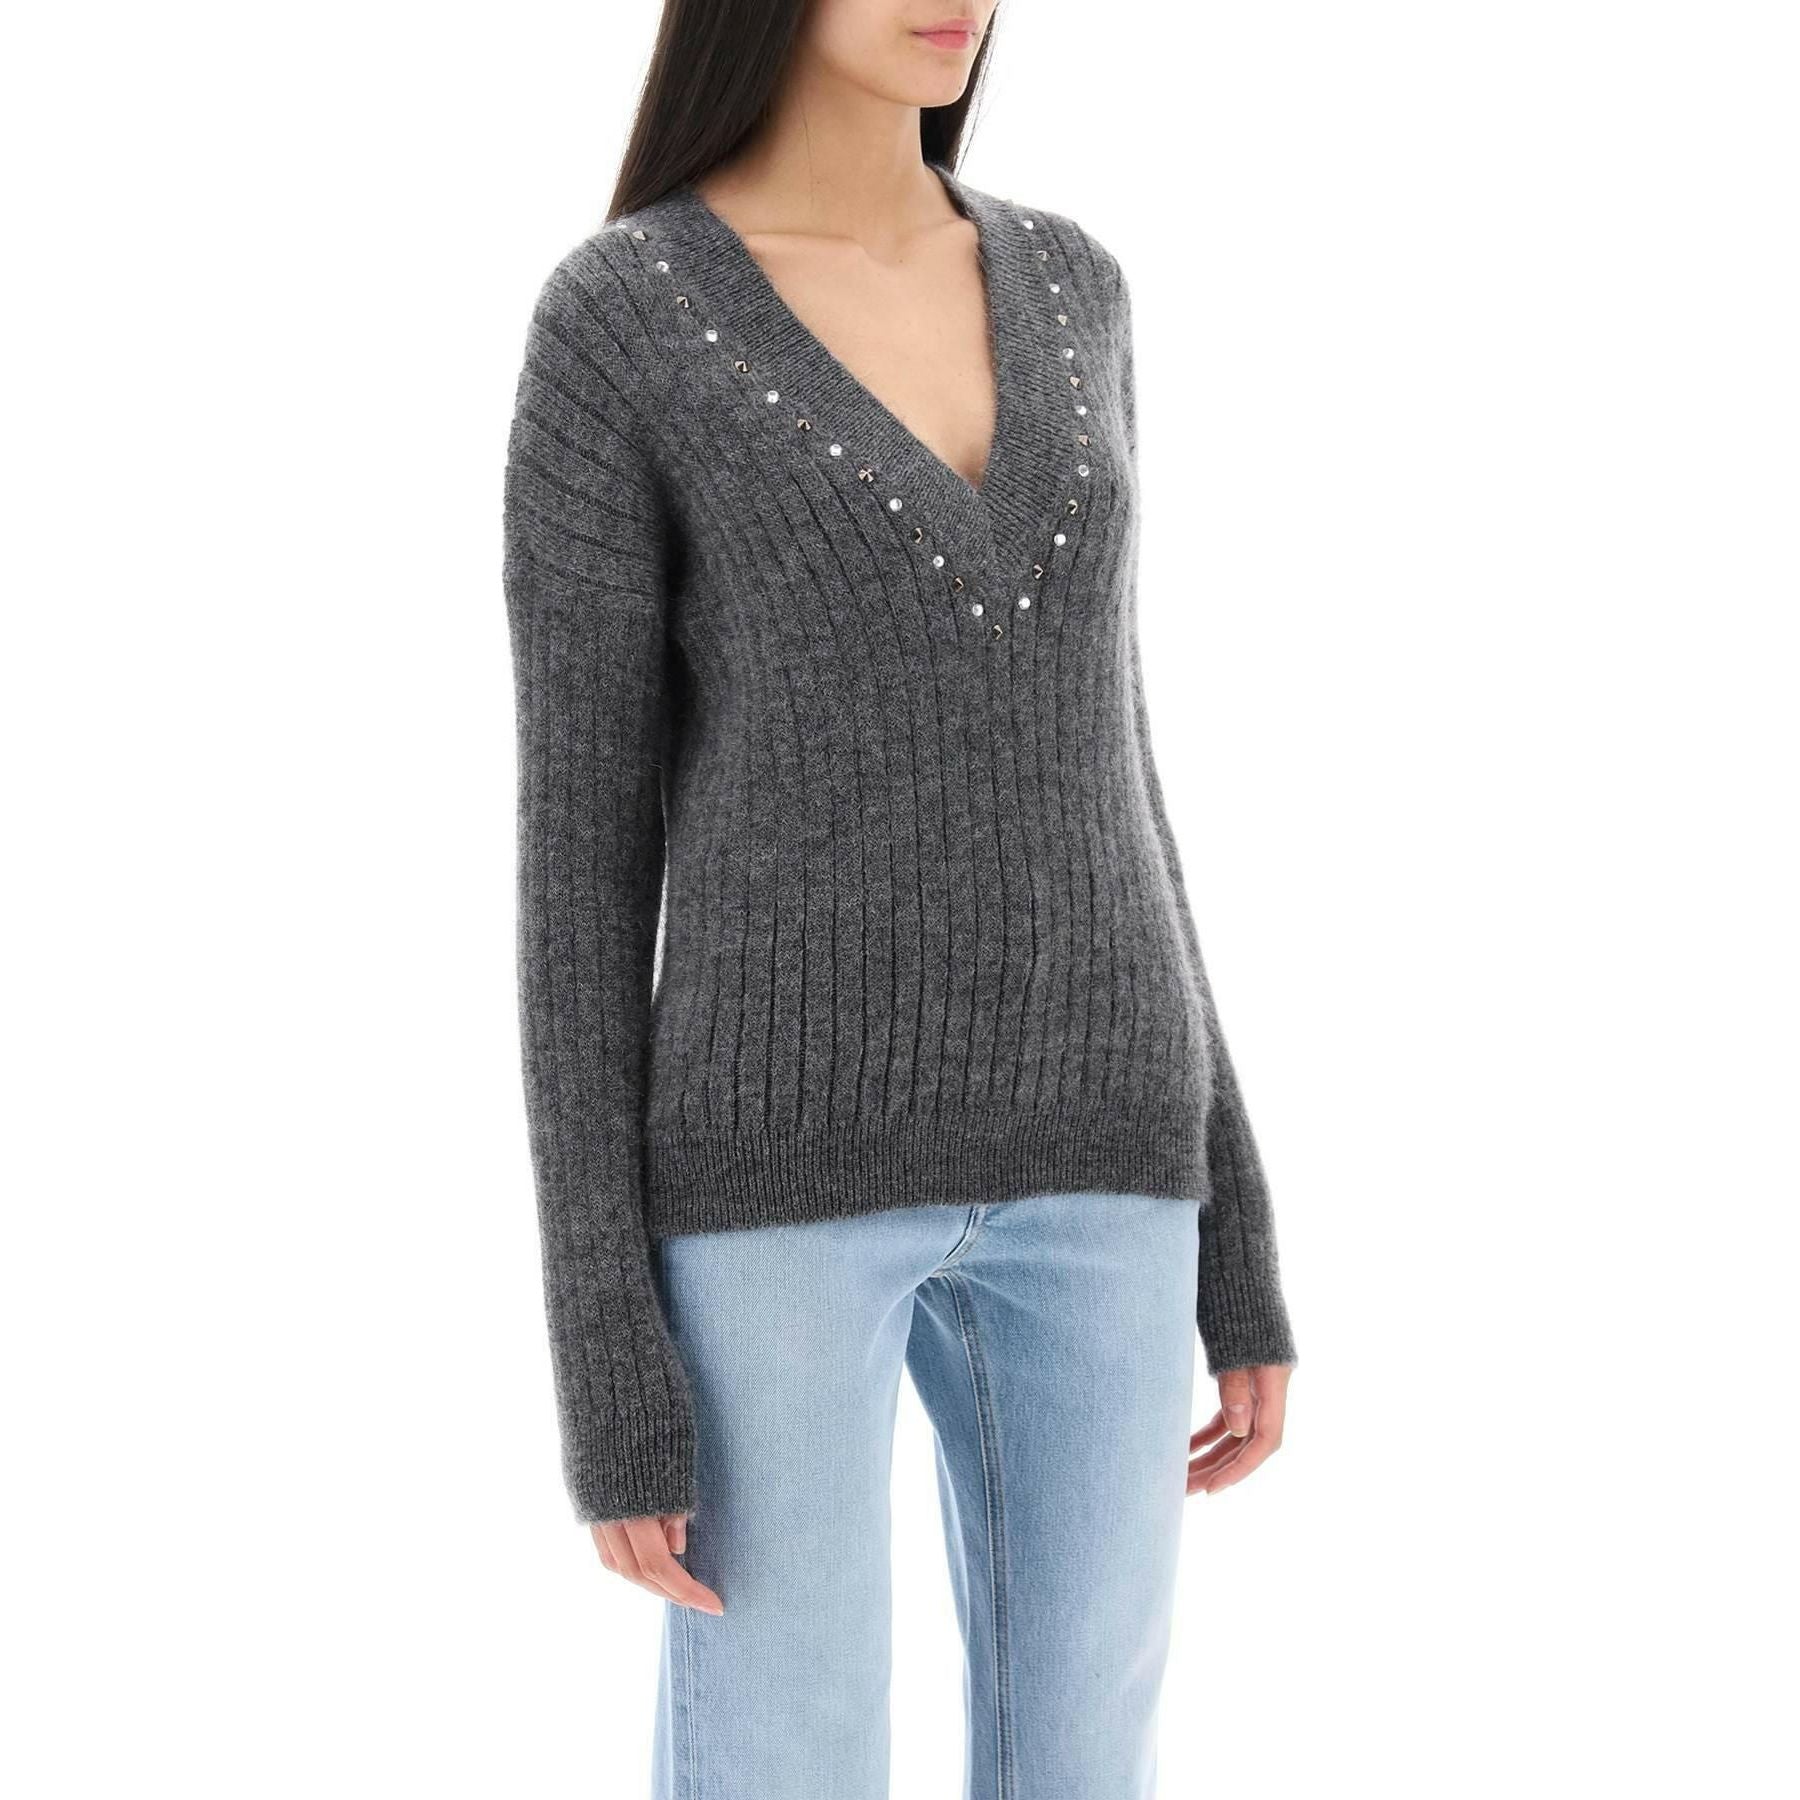 Wool Knit Sweater With Studs And Crystals ALESSANDRA RICH JOHN JULIA.